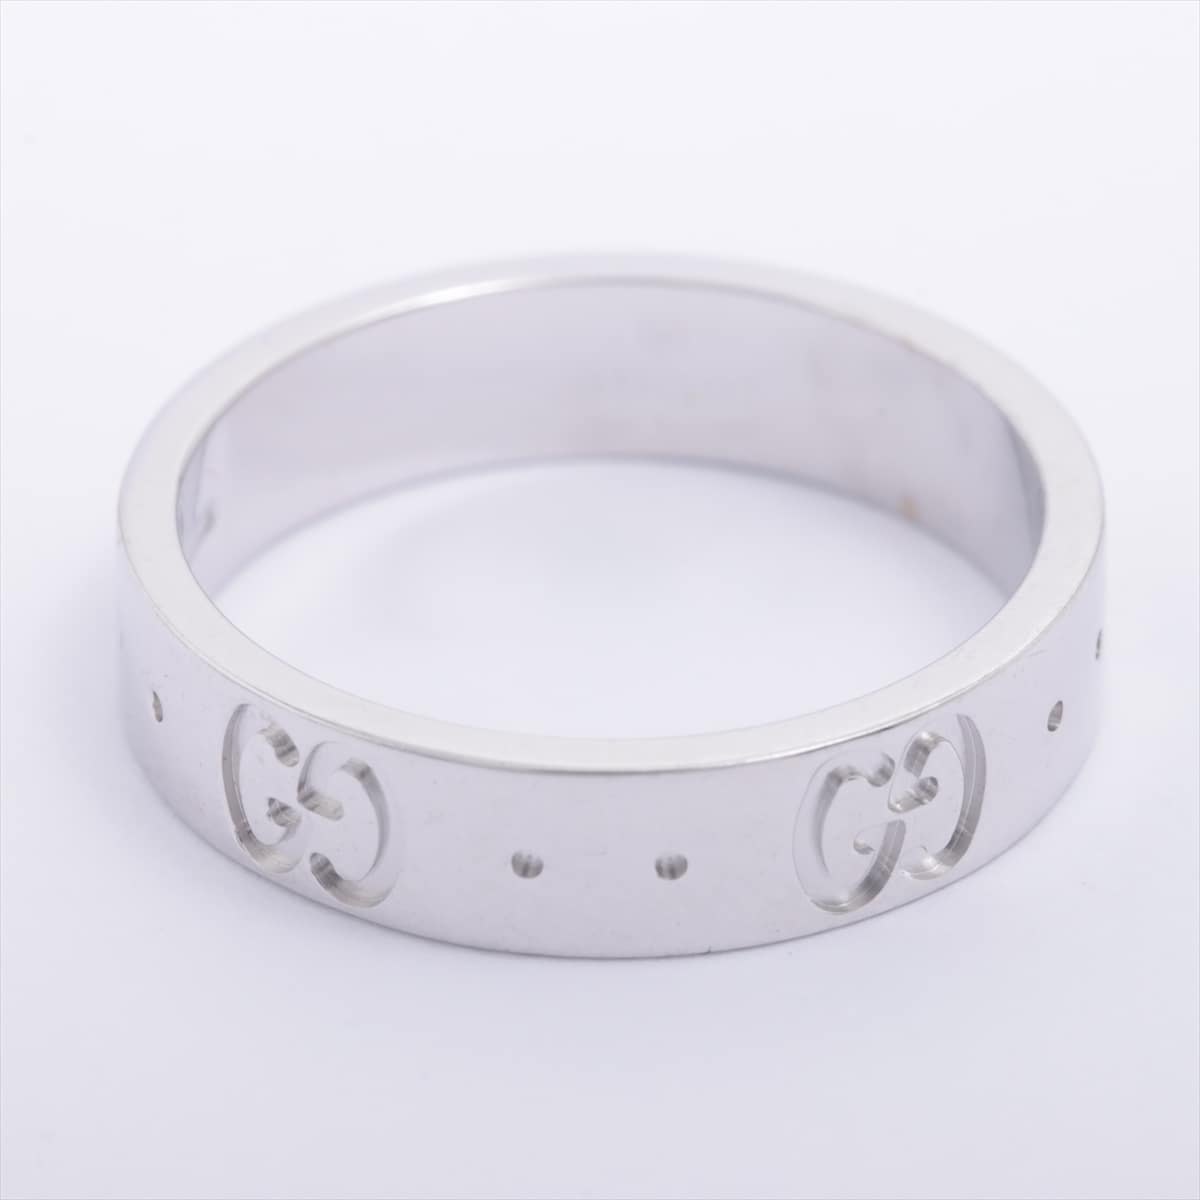 Gucci Icon rings 750 WG 3.3g 8